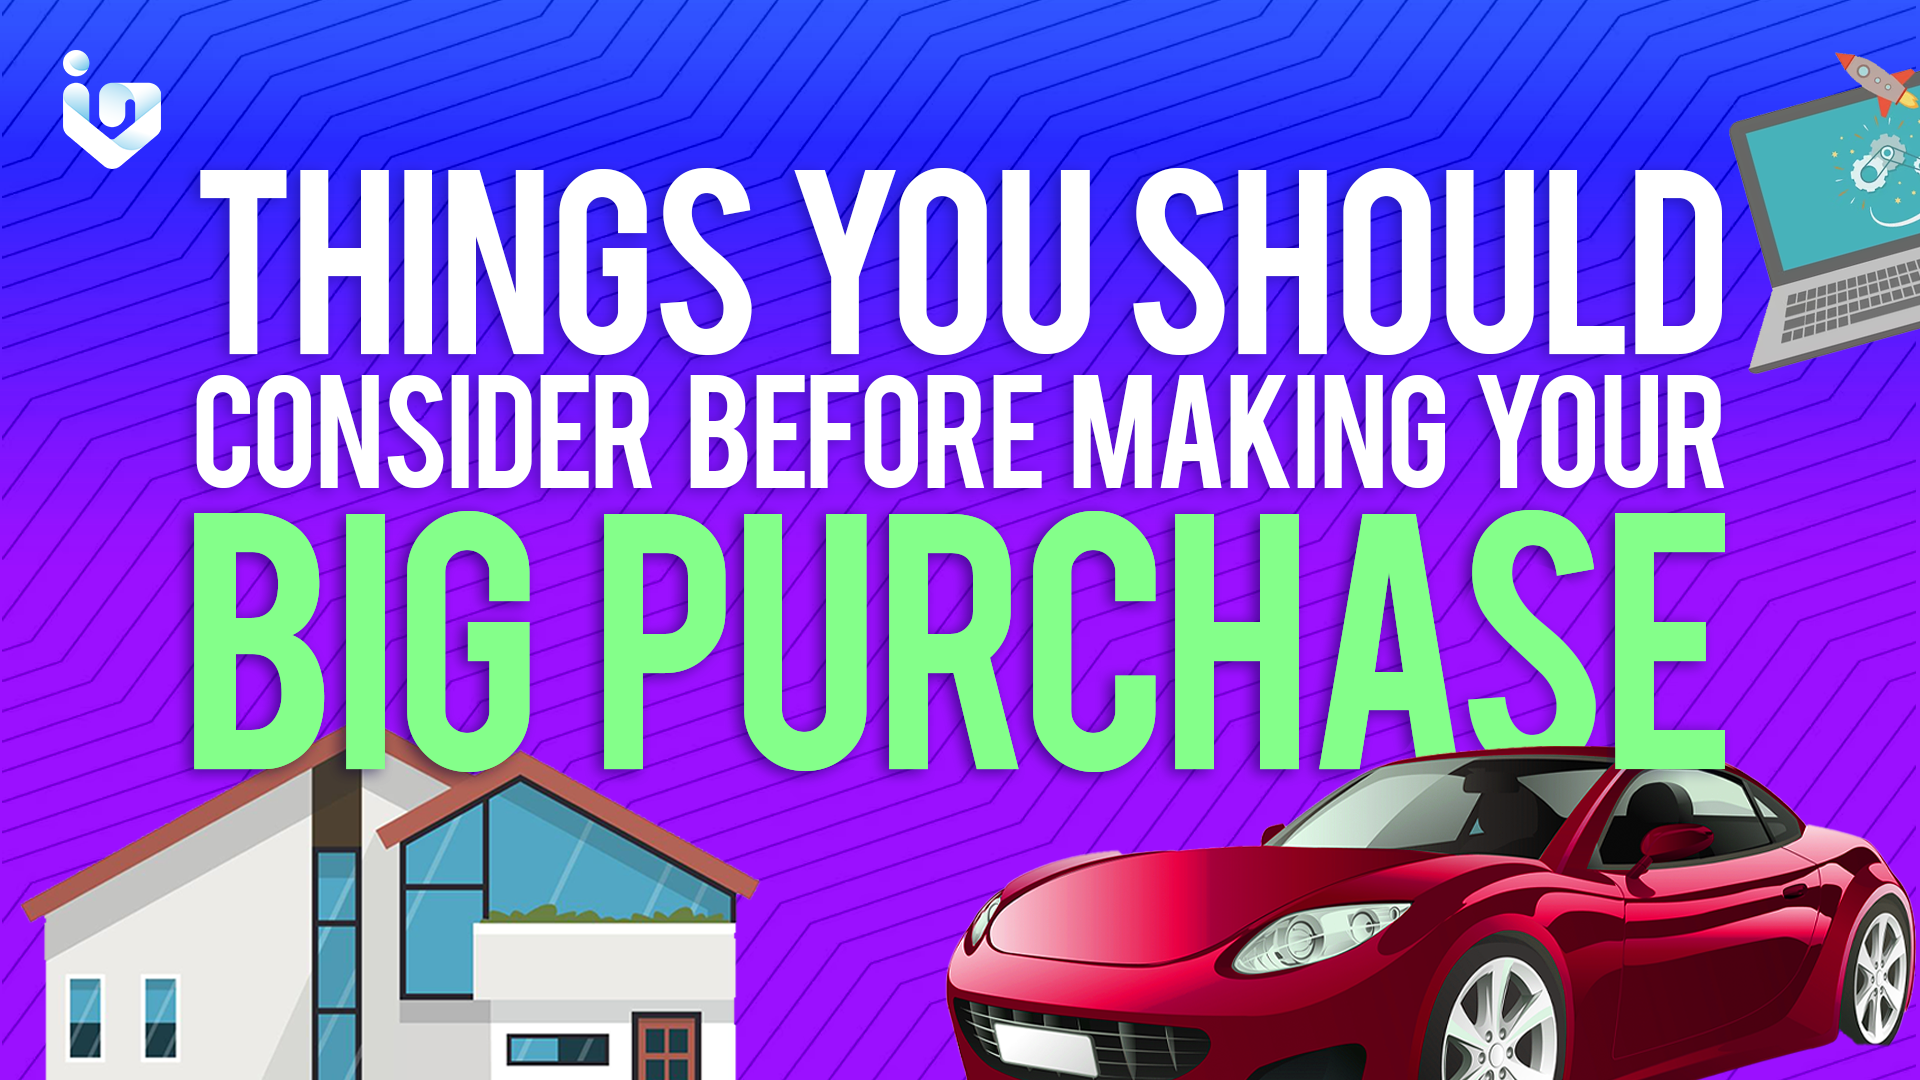 Things You Should Consider Before Making Your Big Purchase